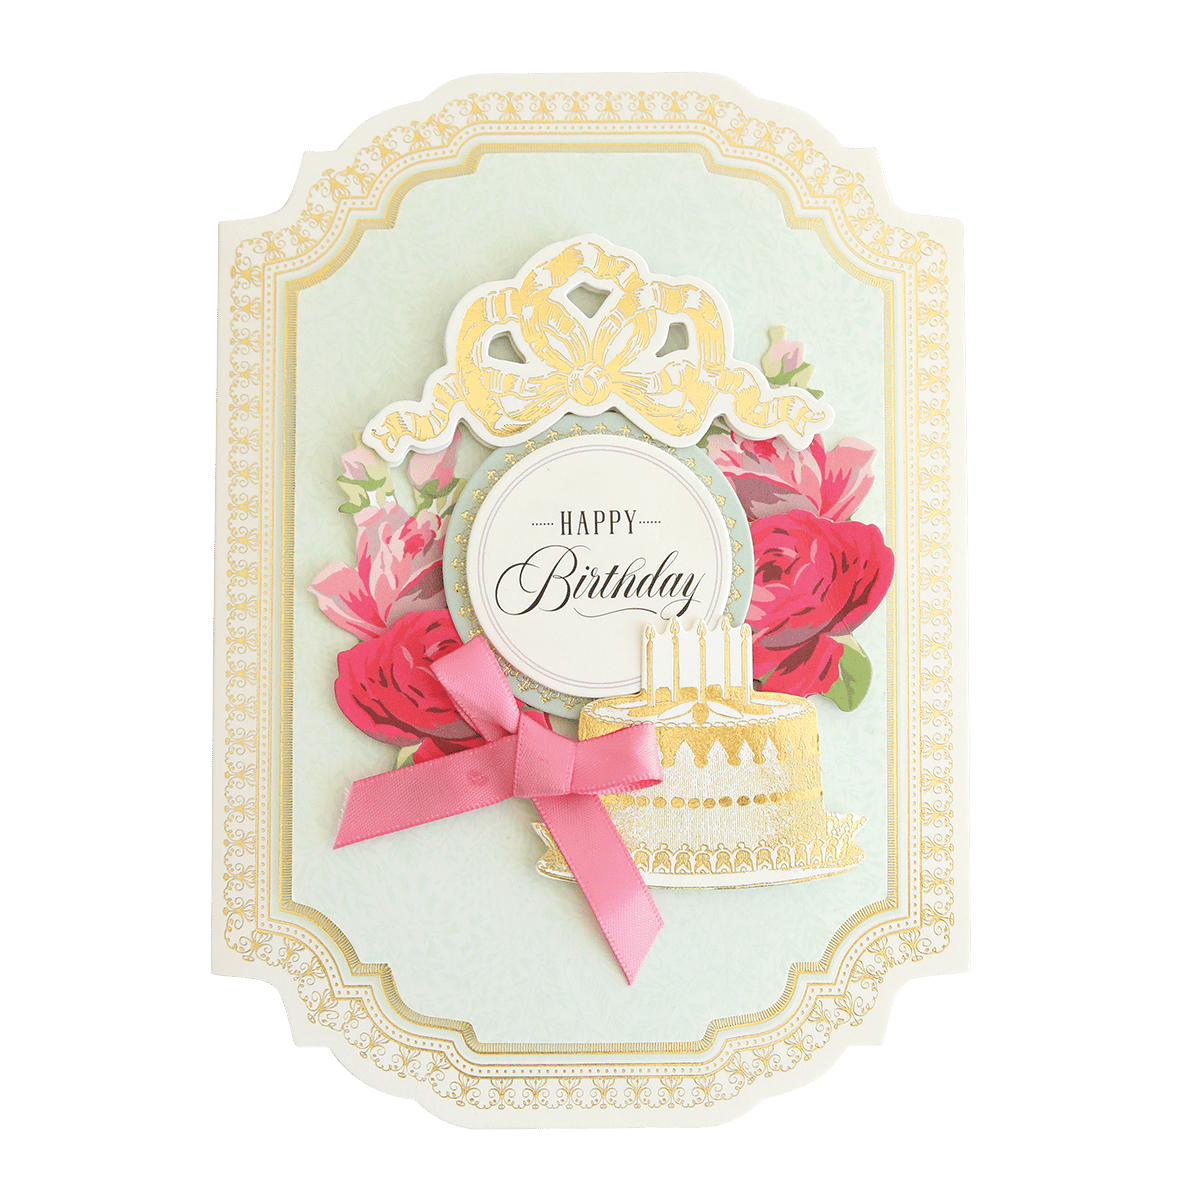 a birthday card with flowers and a cake.